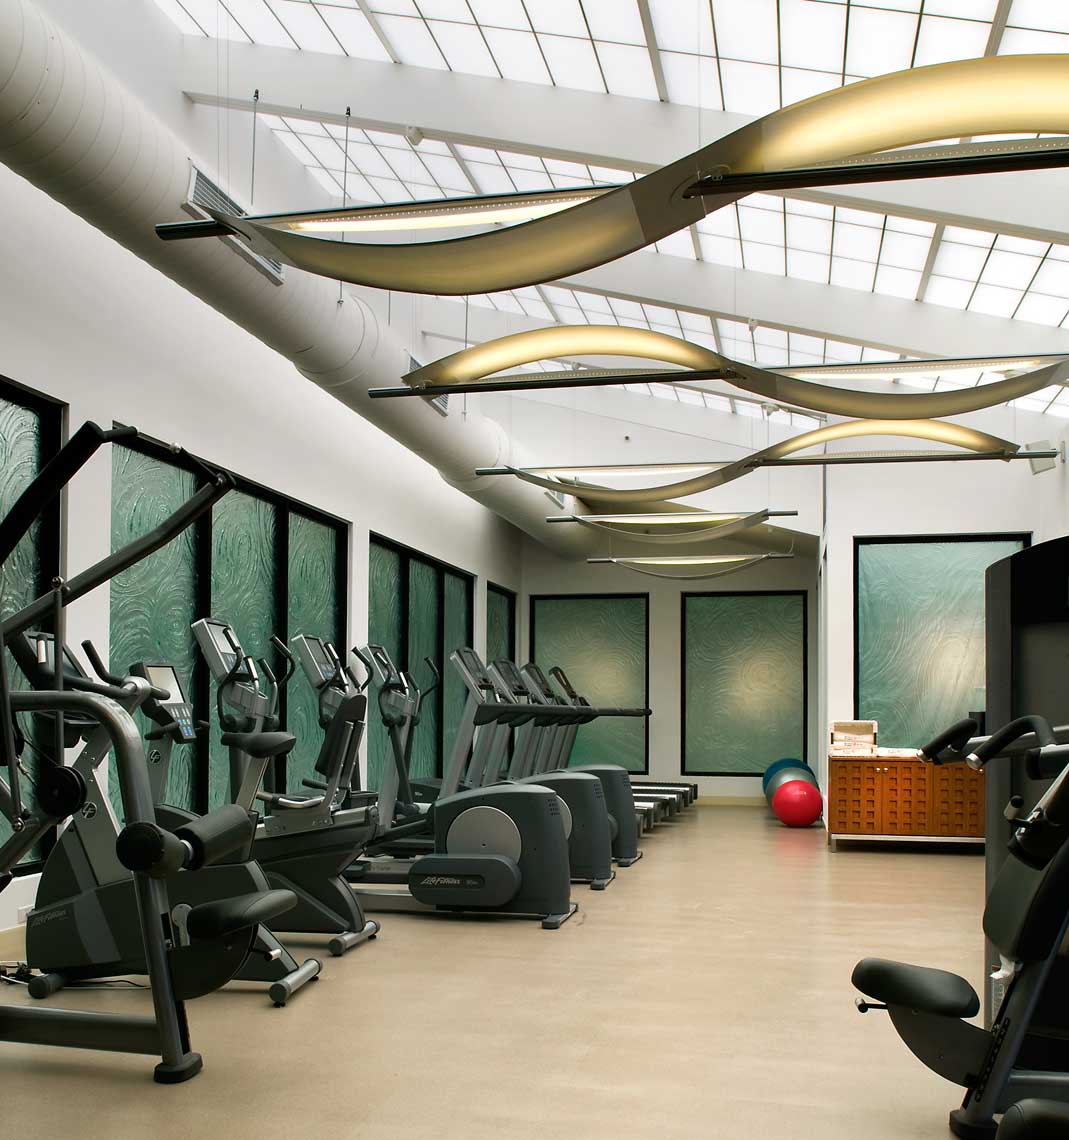 A view of the equipment and lighting at the fitness center of Hyatt Regency Newport